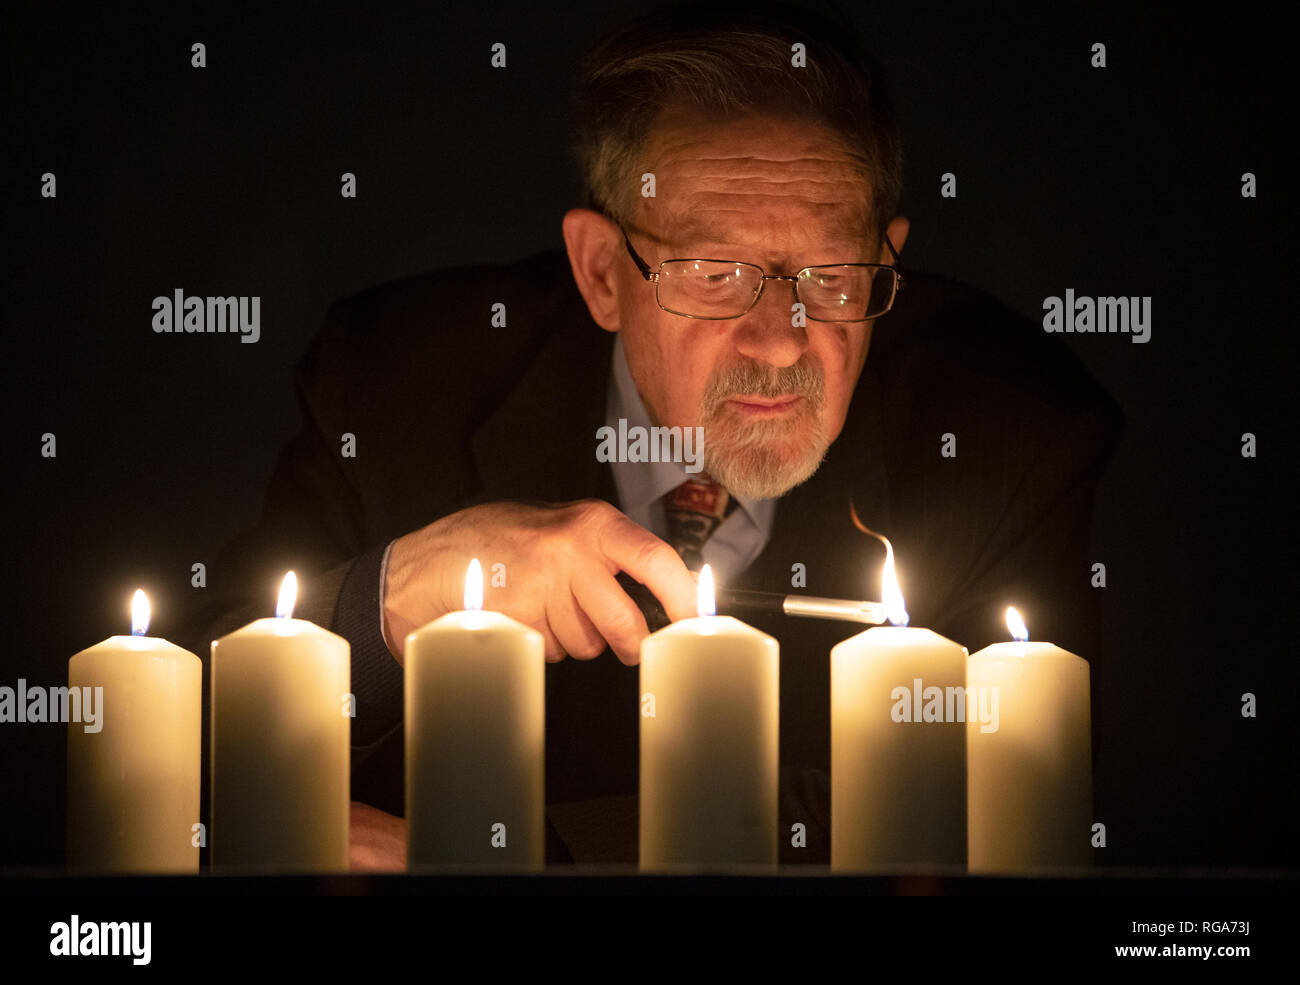 Holocaust survivor Martin Stern lights candles to mark National Holocaust Memorial Day ahead of a Holocaust and genocide survivors event at the Eastwood Park Theatre in Giffnock, East Renfrewshire. Stock Photo